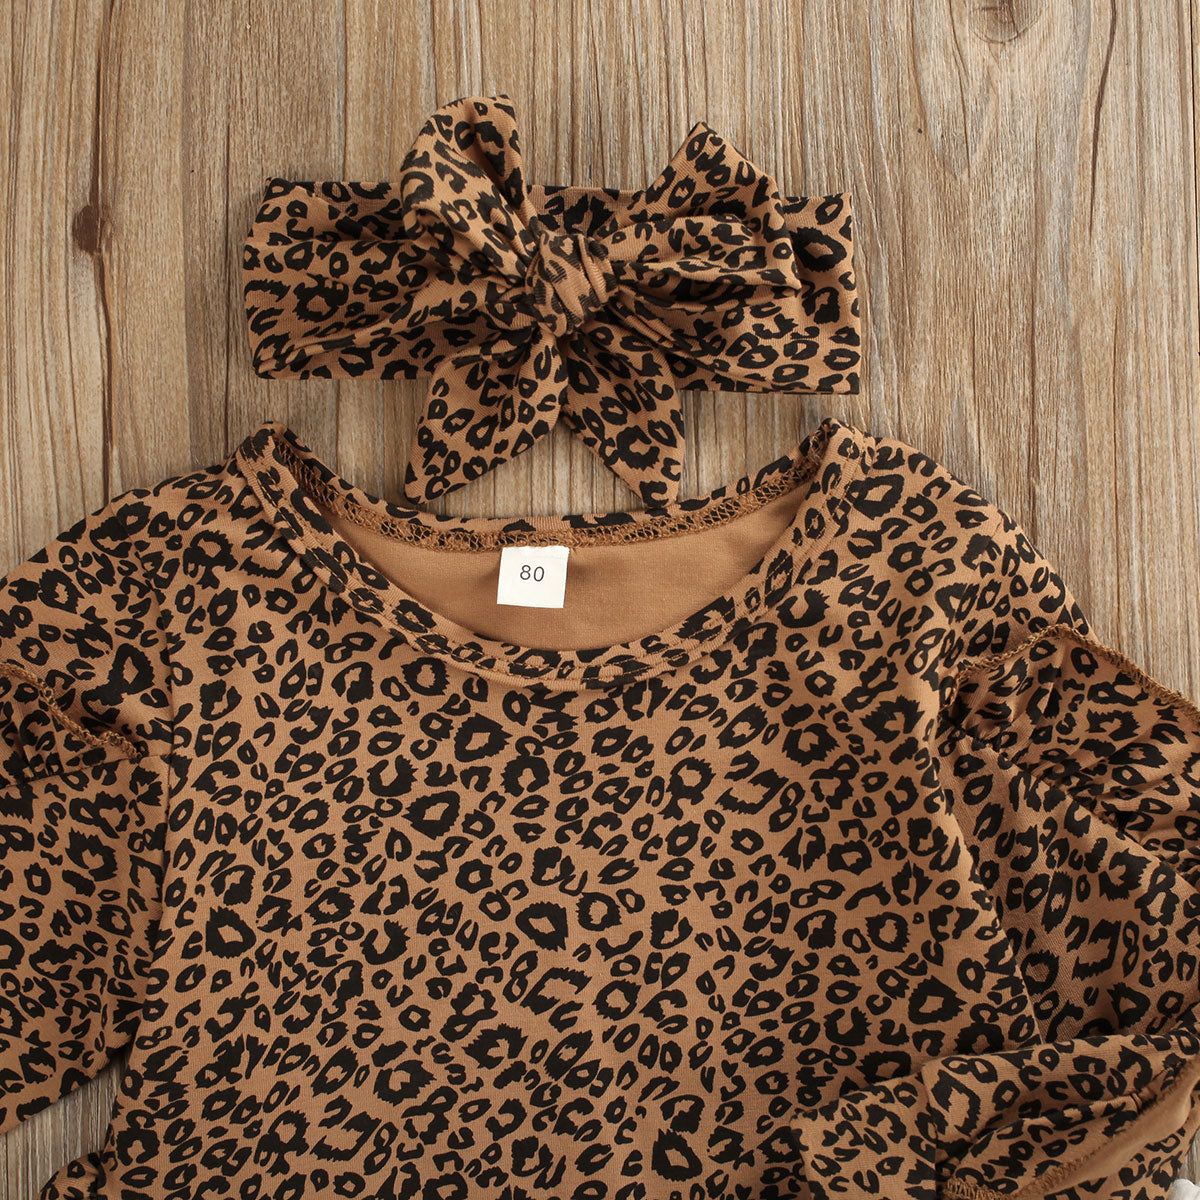 "Tallulah" Ruffled Leopard Print 3 Piece Outfit (12M-5T)